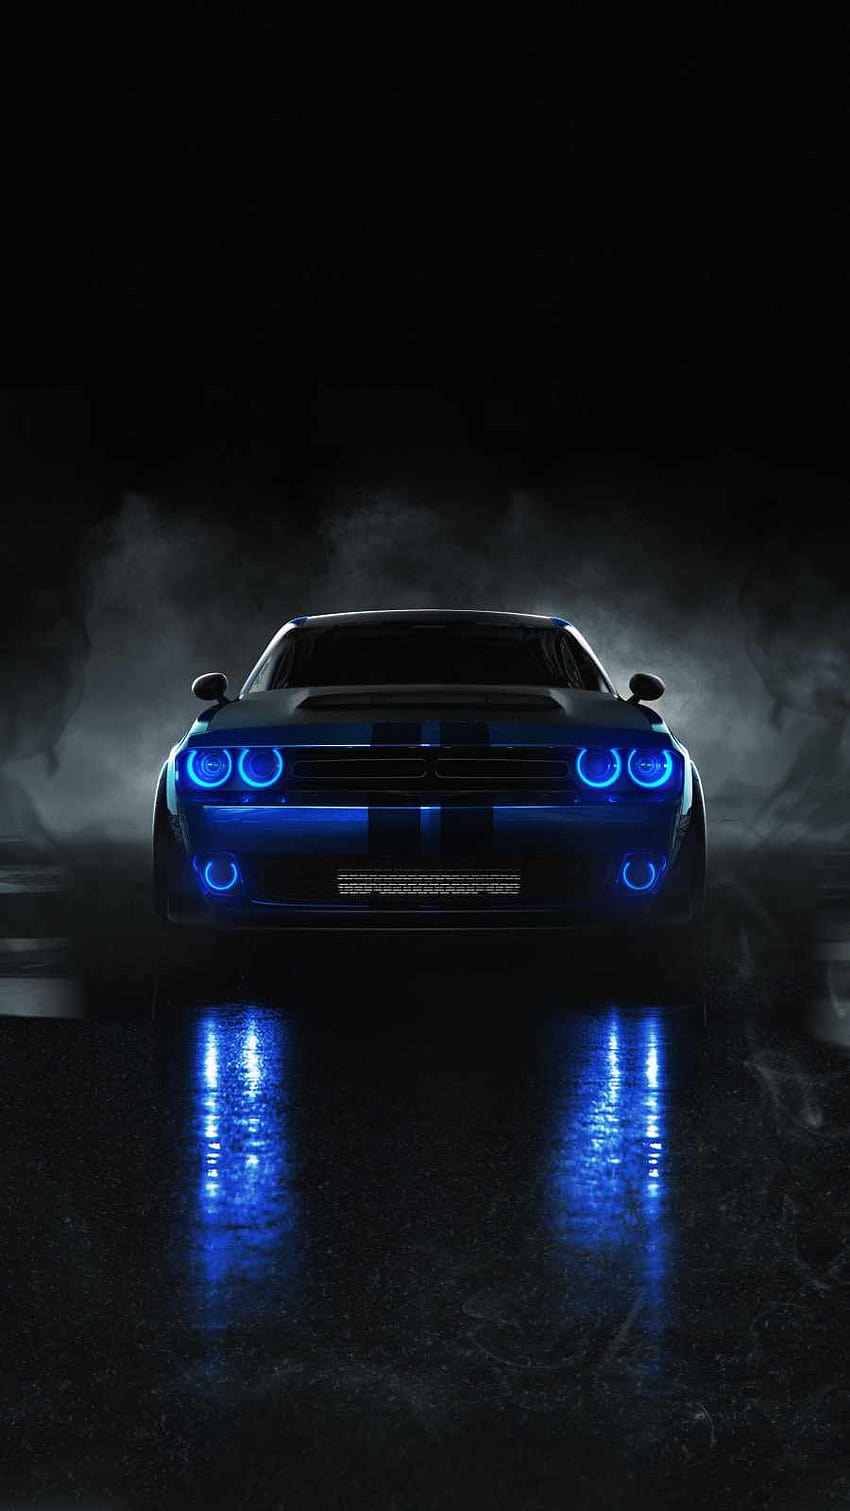 Dodge Challenger Muscle Car 1, 2021 muscle car HD phone wallpaper